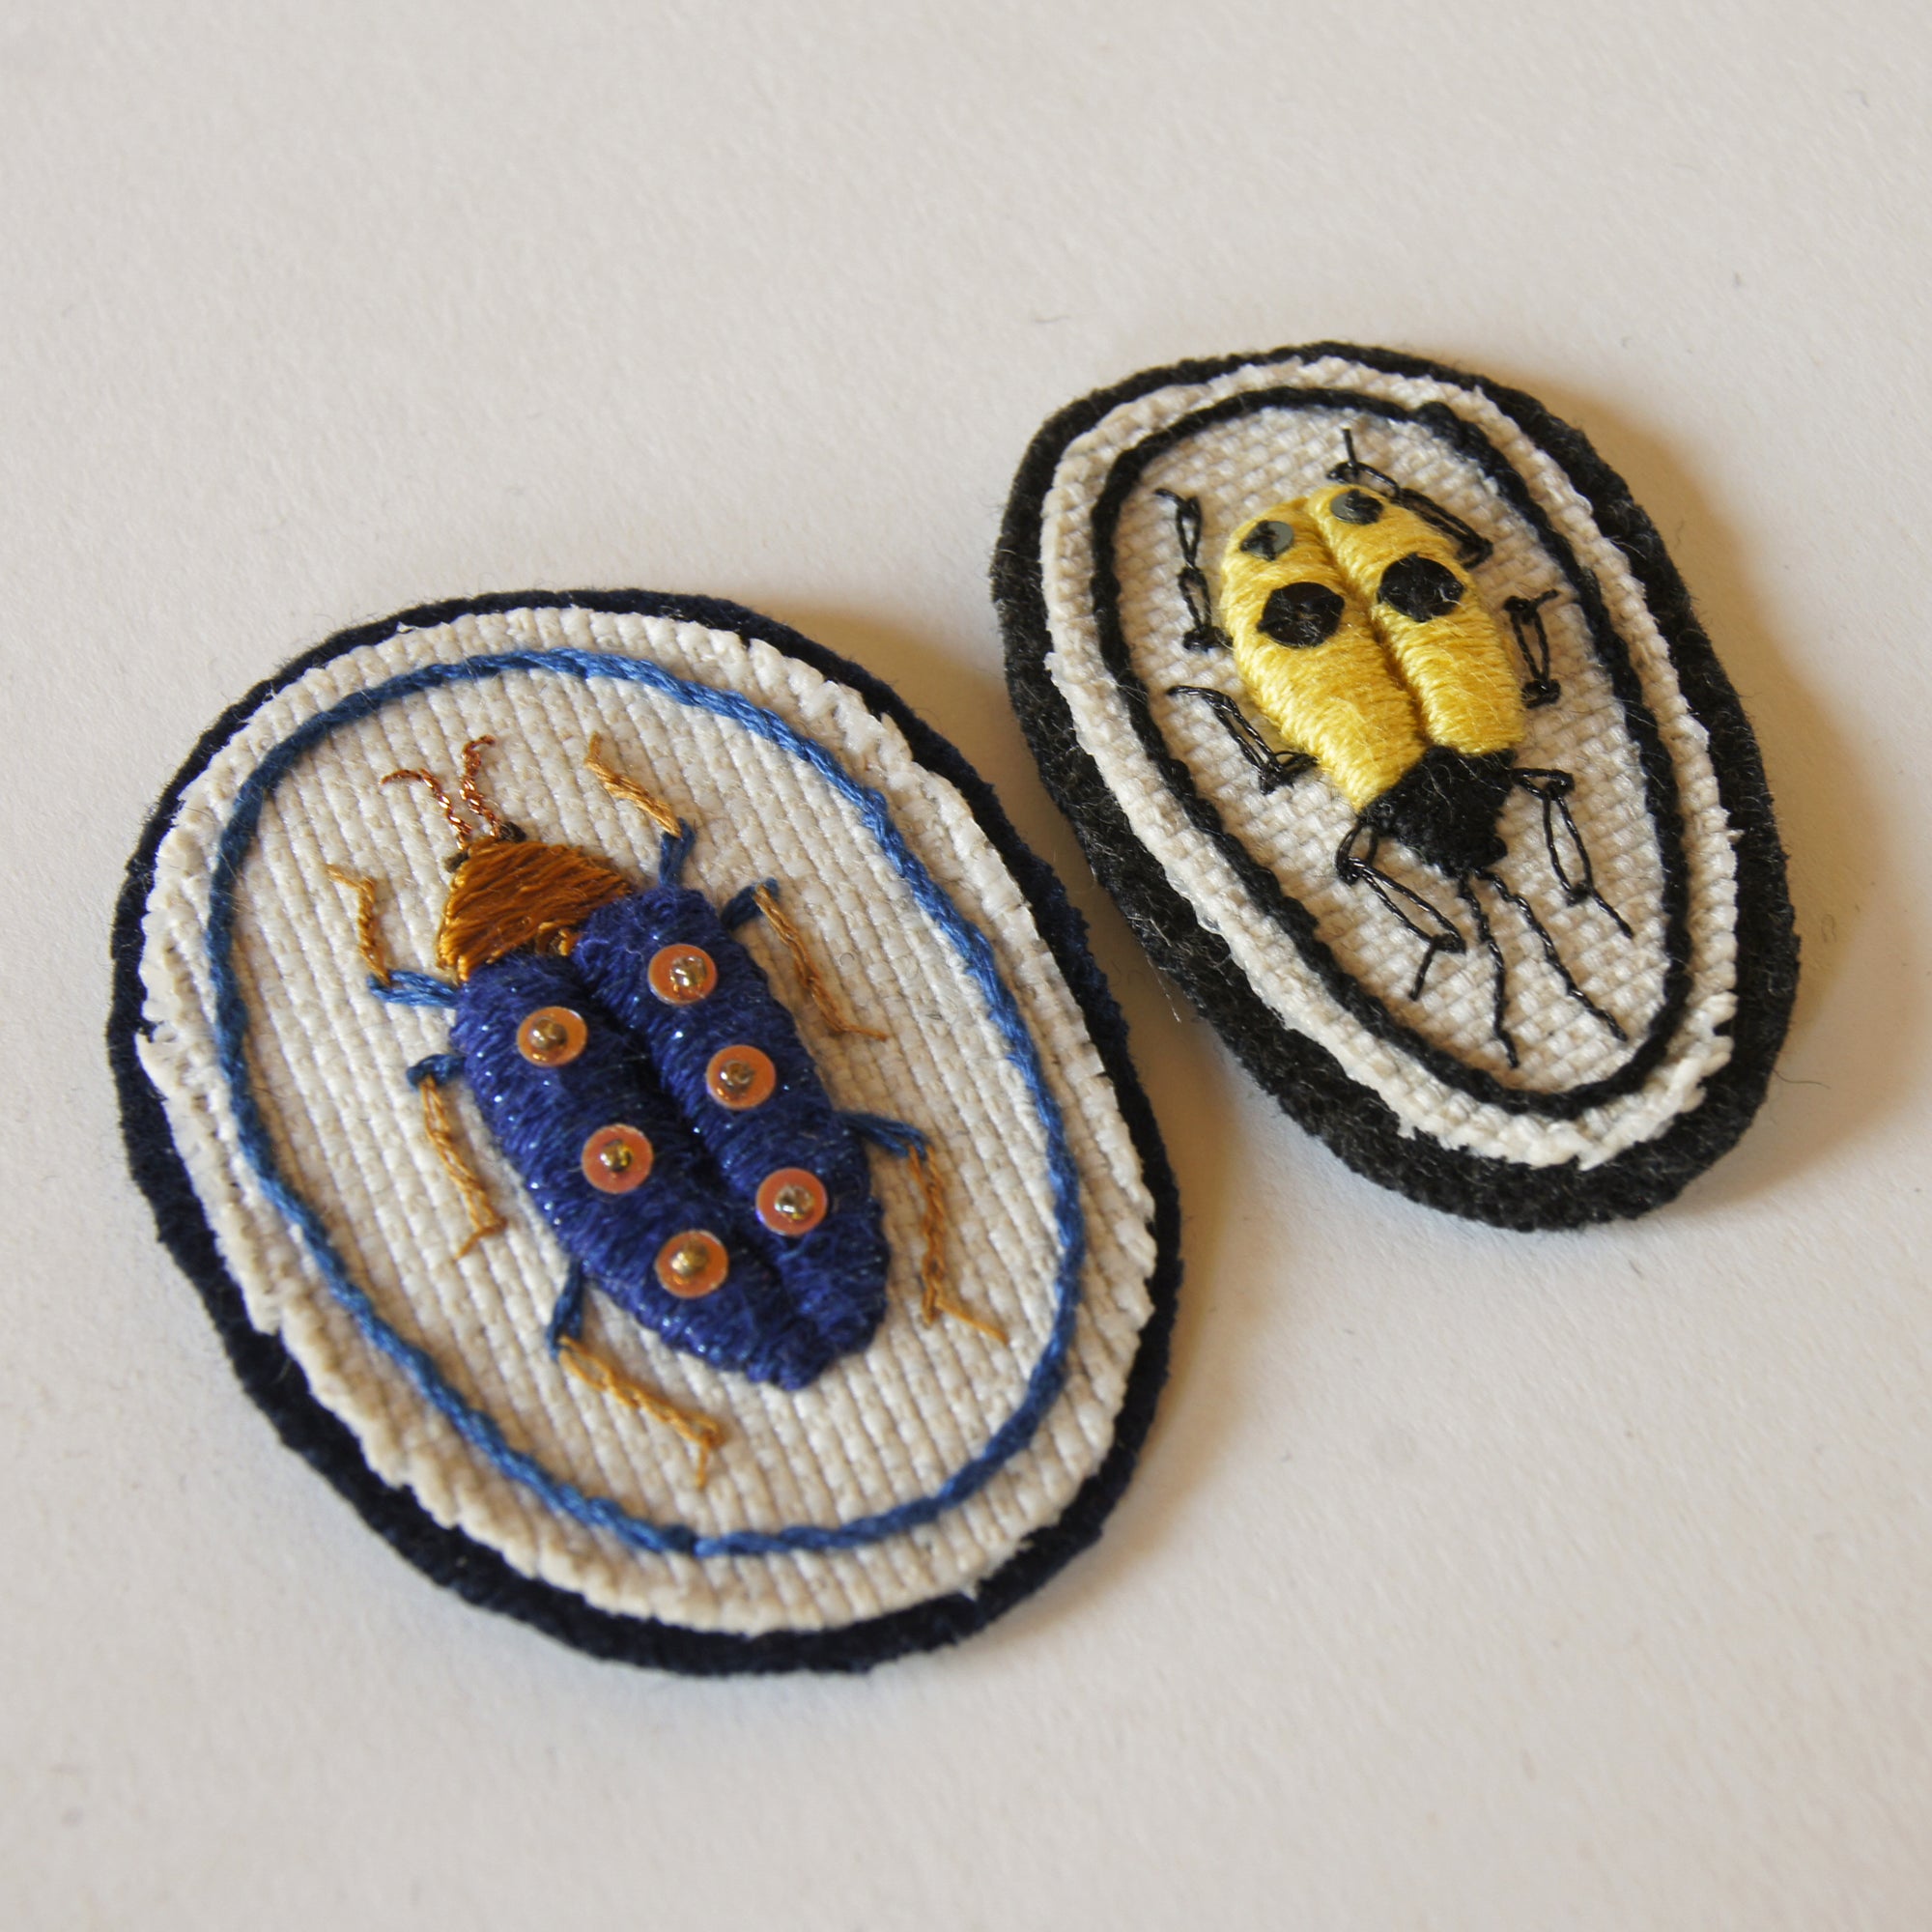 Hand Embroidered Sew On Patches Set of Two Jewel Beetles Buprestidae